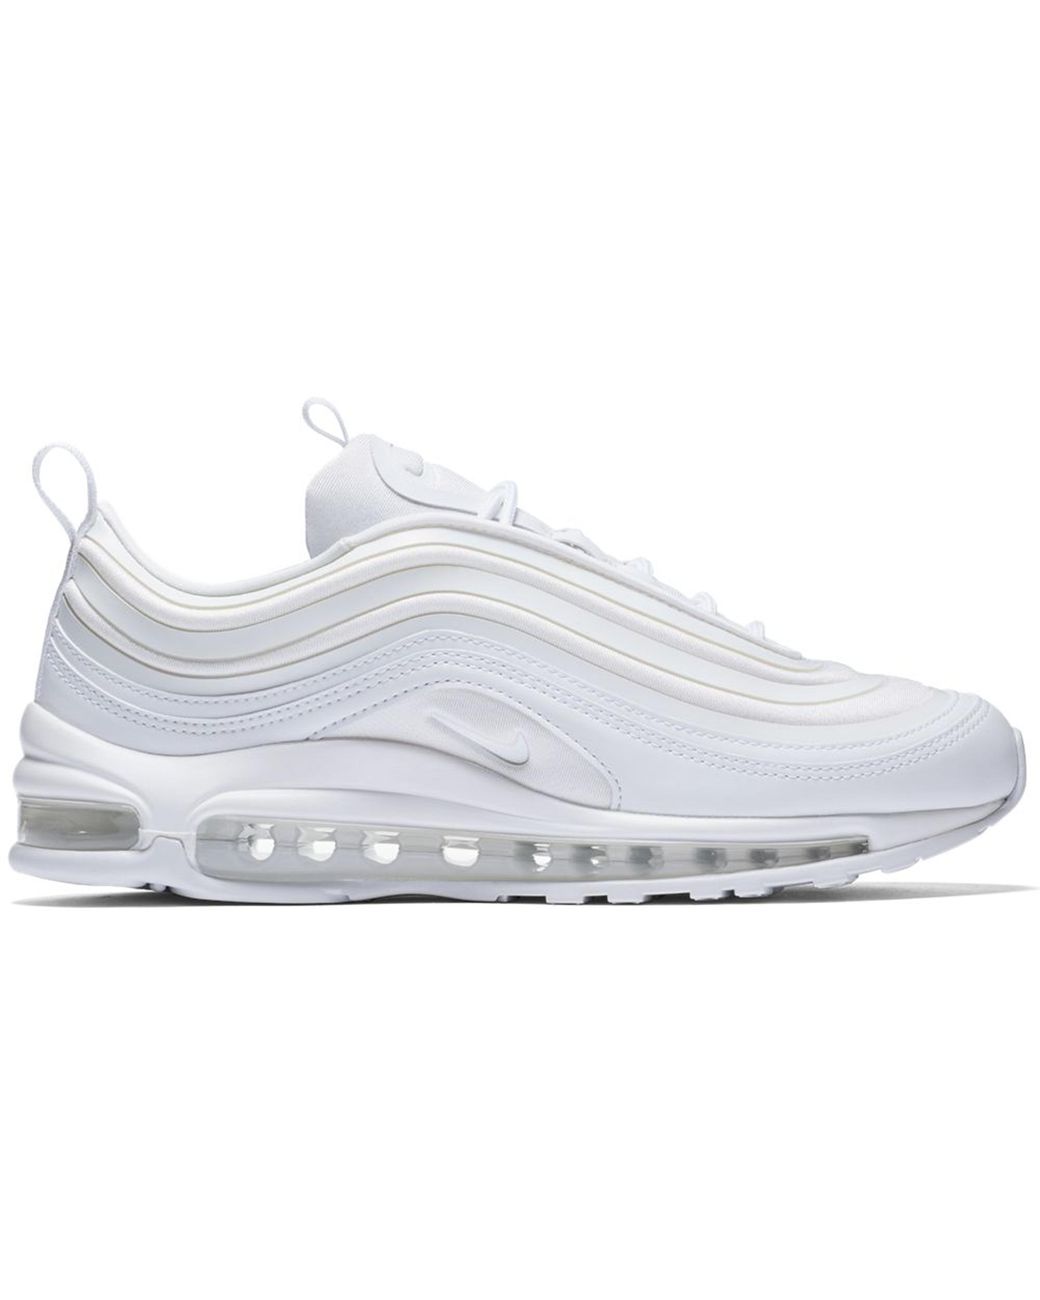 Nike Air Max 97 PRM Wolf Grey Where To Buy 312834 005